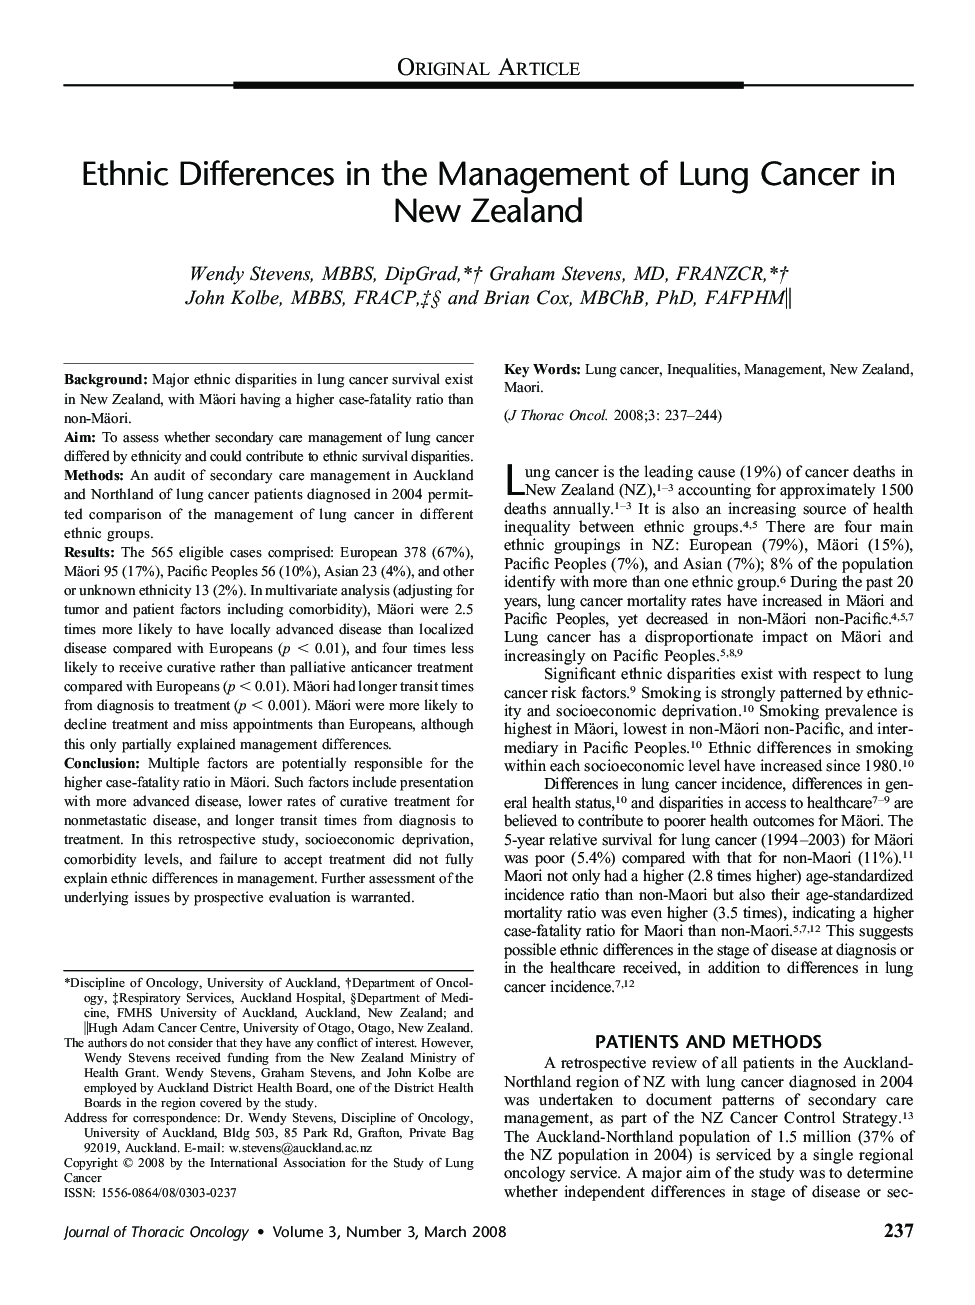 Ethnic Differences in the Management of Lung Cancer in New Zealand 